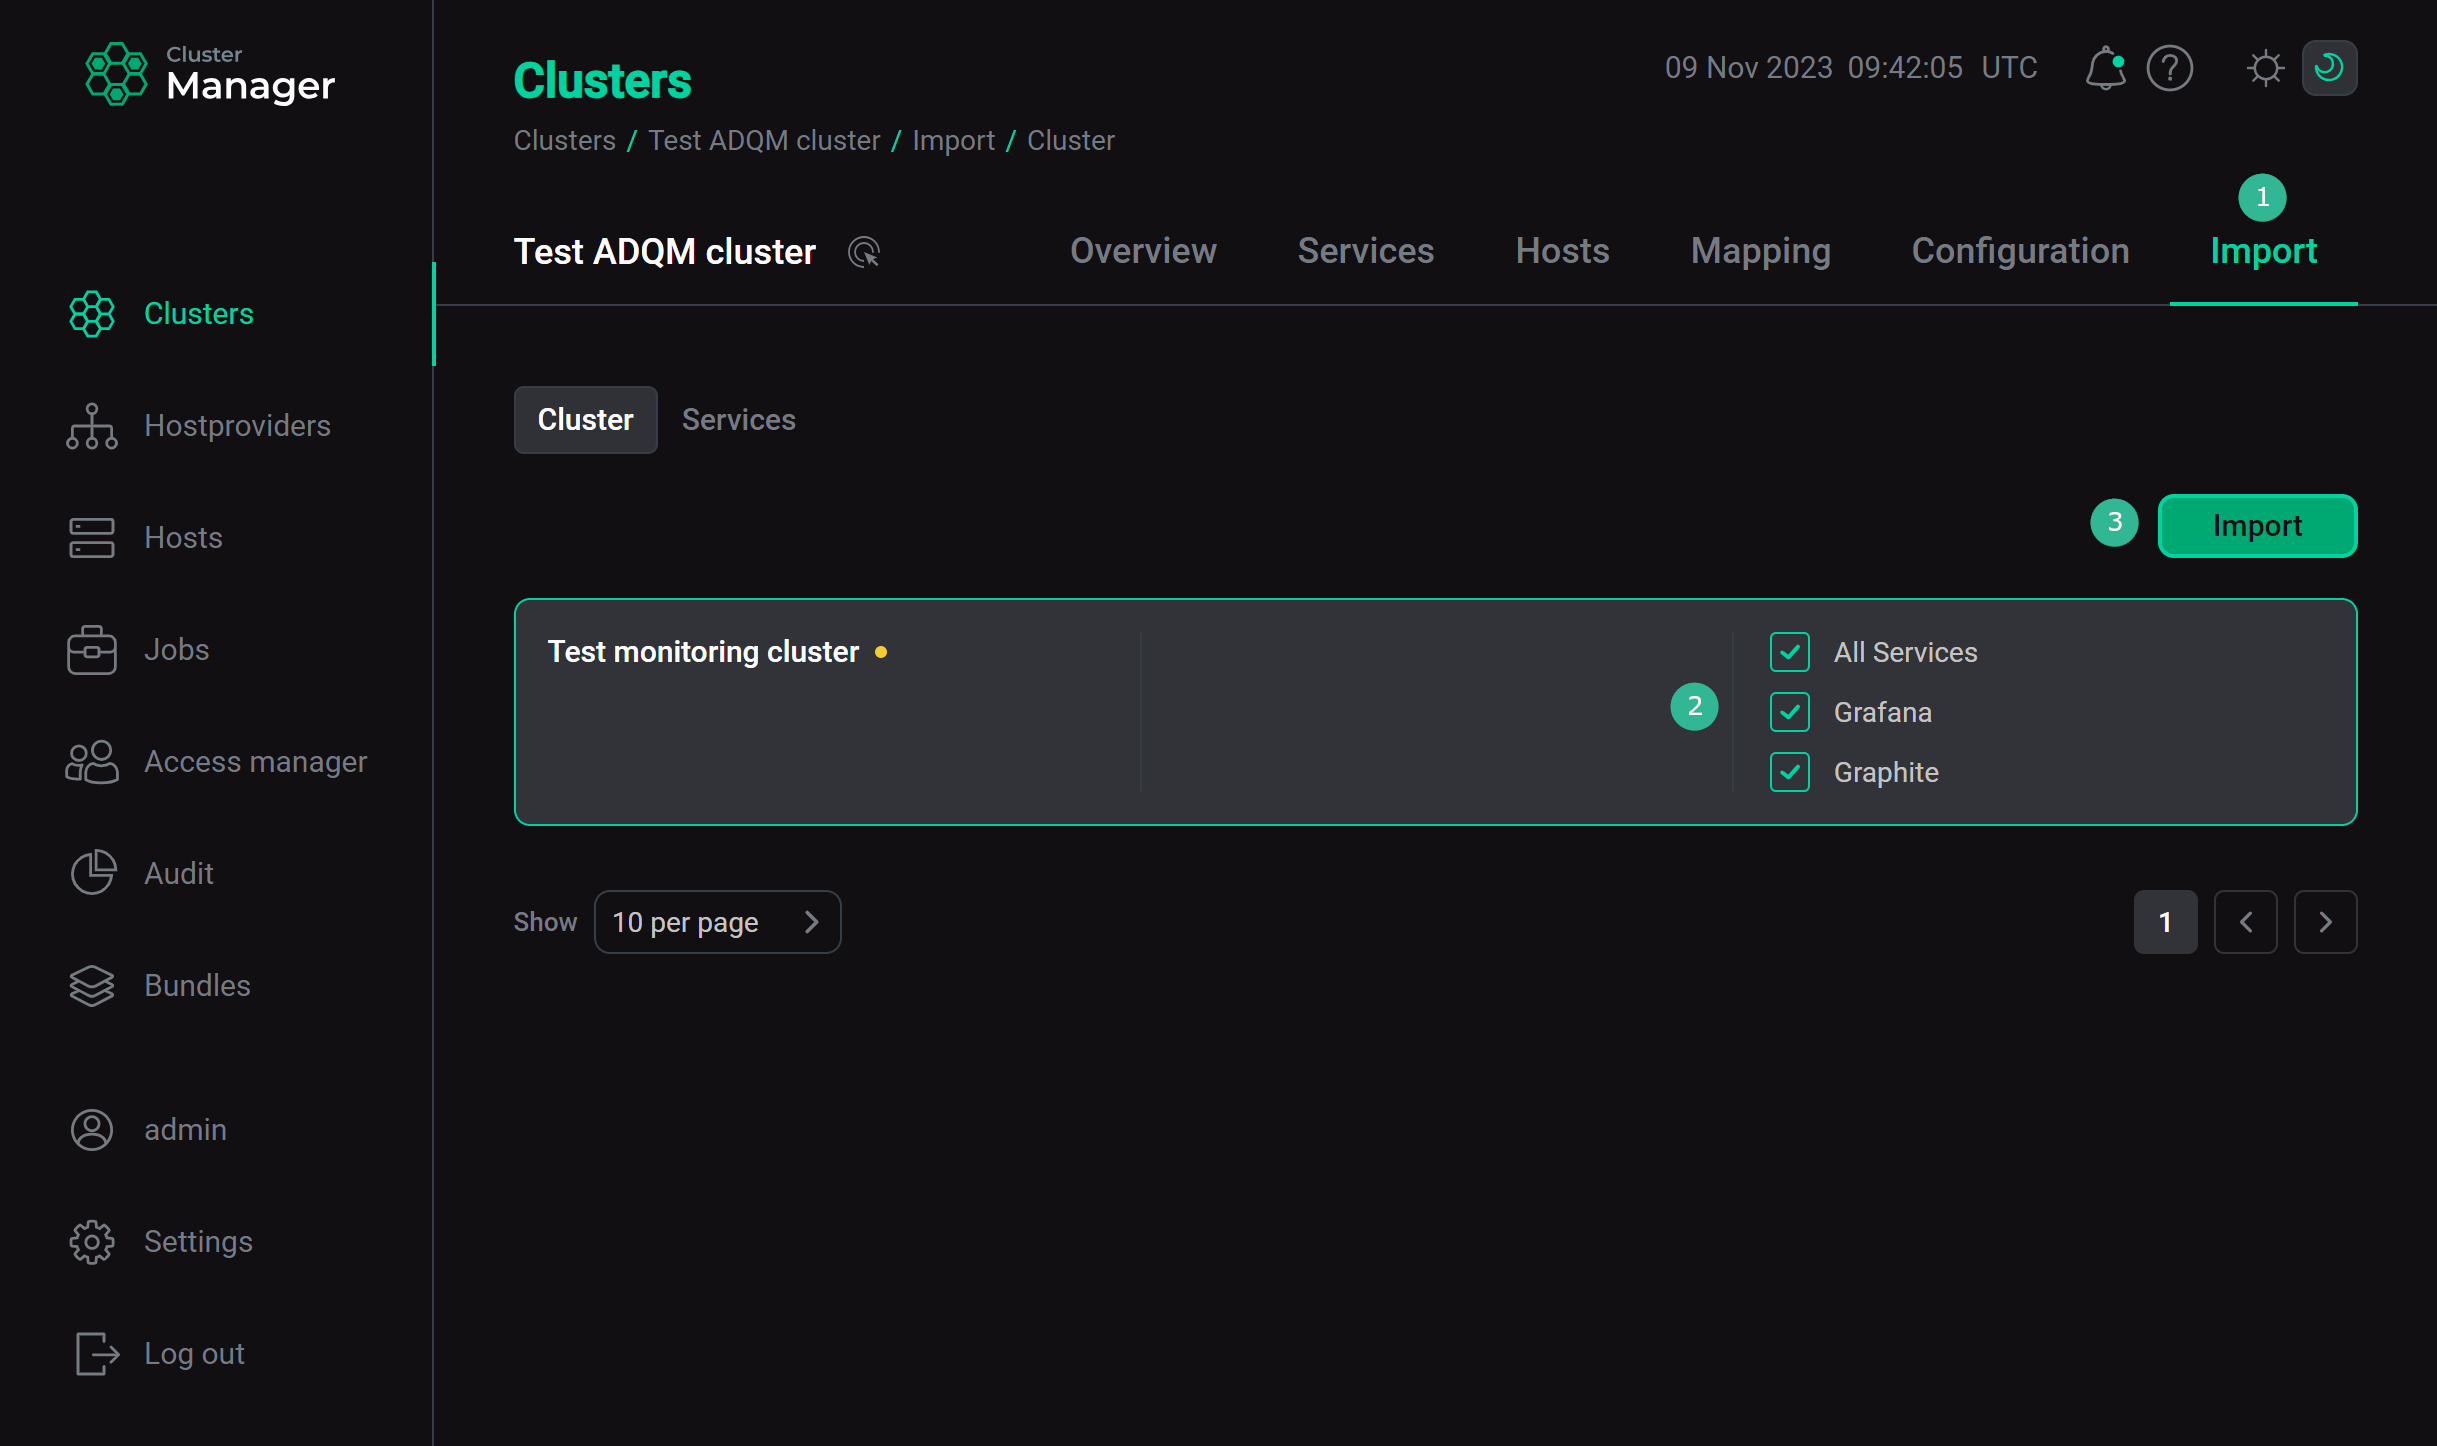 Integration with a monitoring cluster